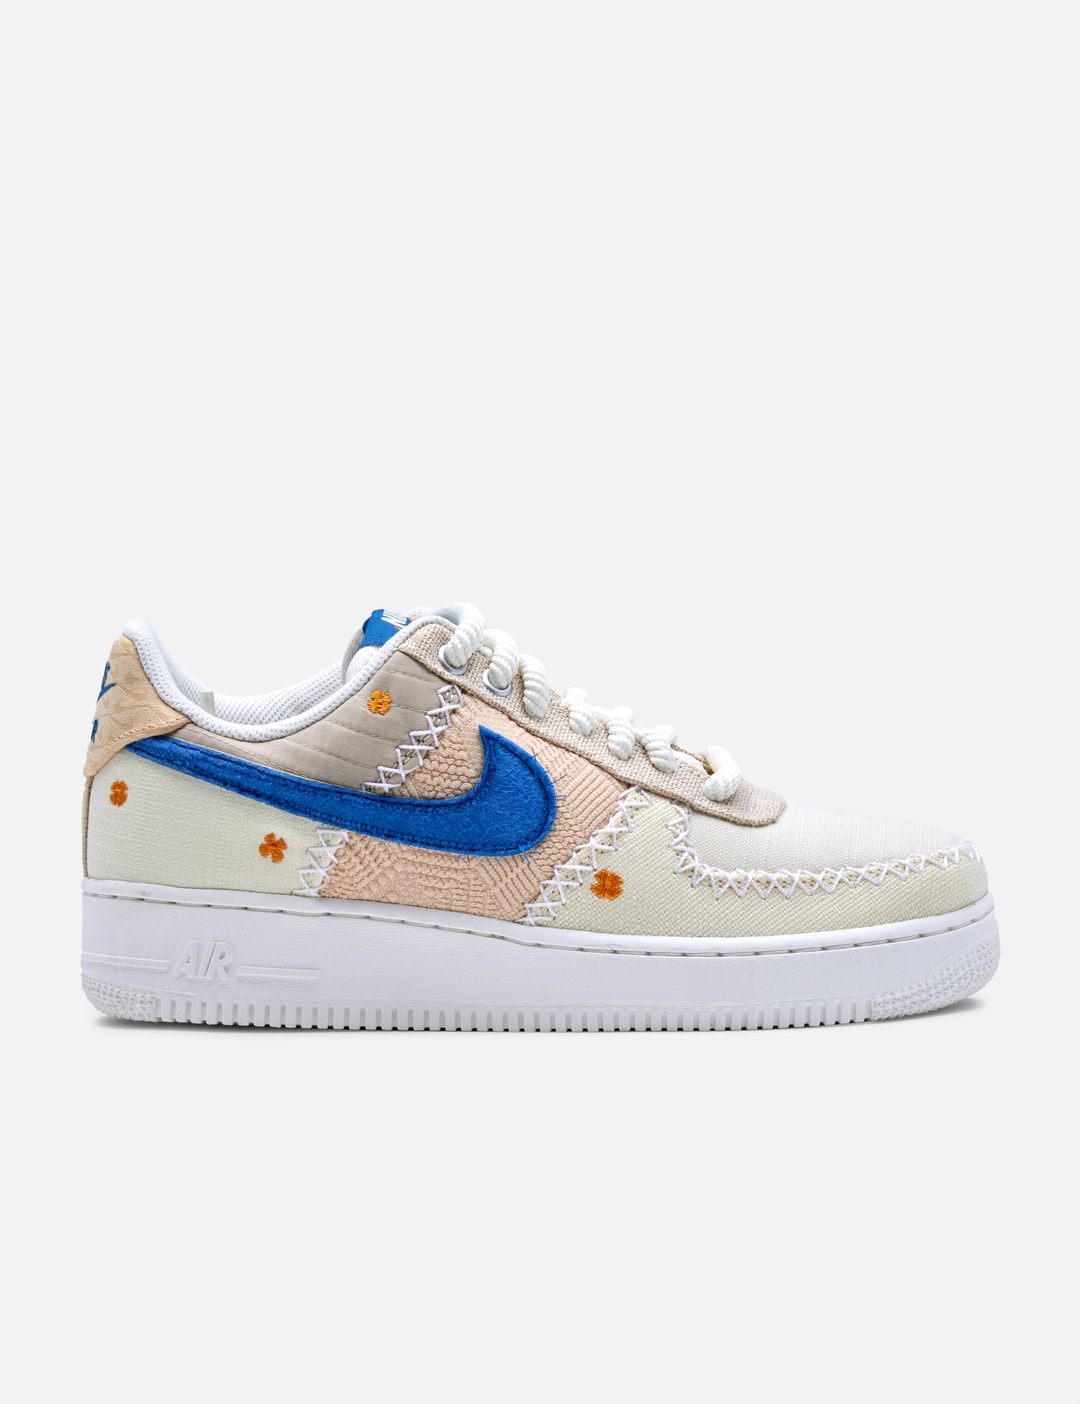 Frente Primer ministro neumático Nike - Nike Air Force 1 '07 Premium | HBX - Globally Curated Fashion and  Lifestyle by Hypebeast